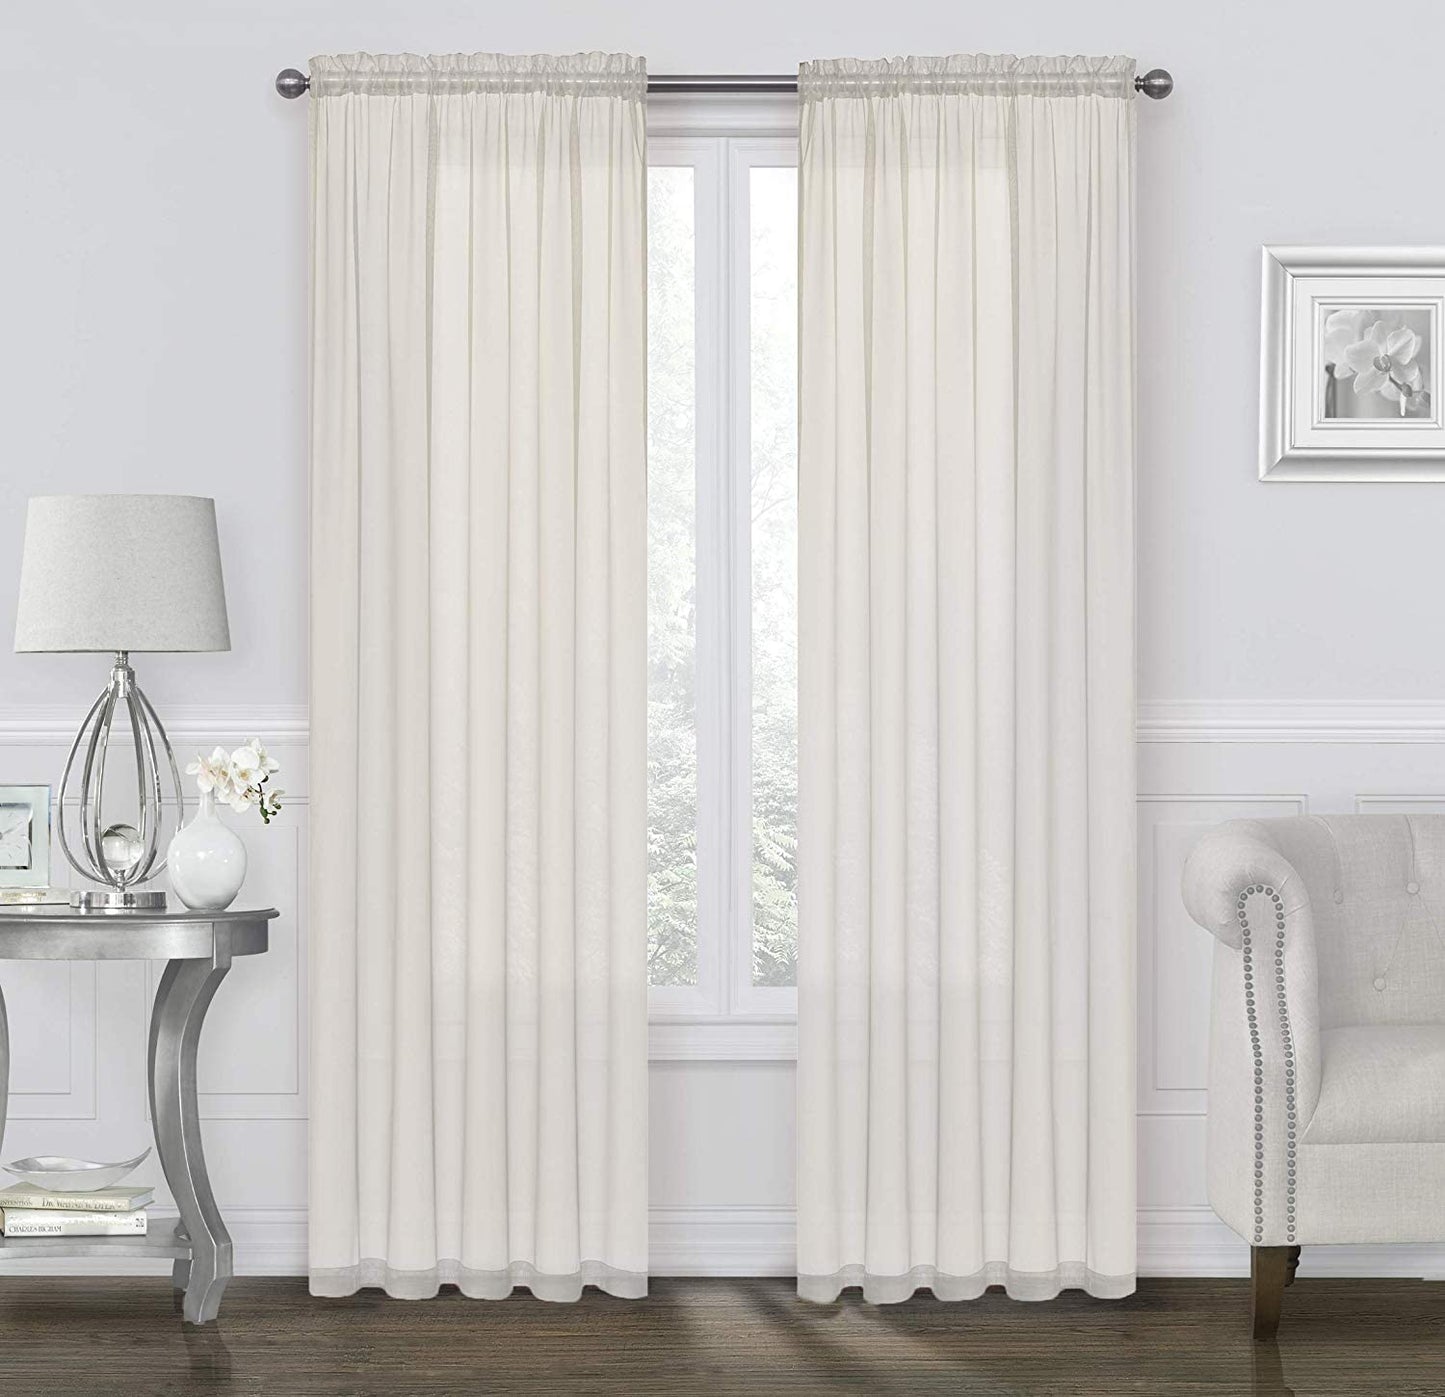 Goodgram 2 Pack: Basic Rod Pocket Sheer Voile Window Curtain Panels - Assorted Colors (White, 84 In. Long)  Goodgram Ivory Contemporary 72 In. Long